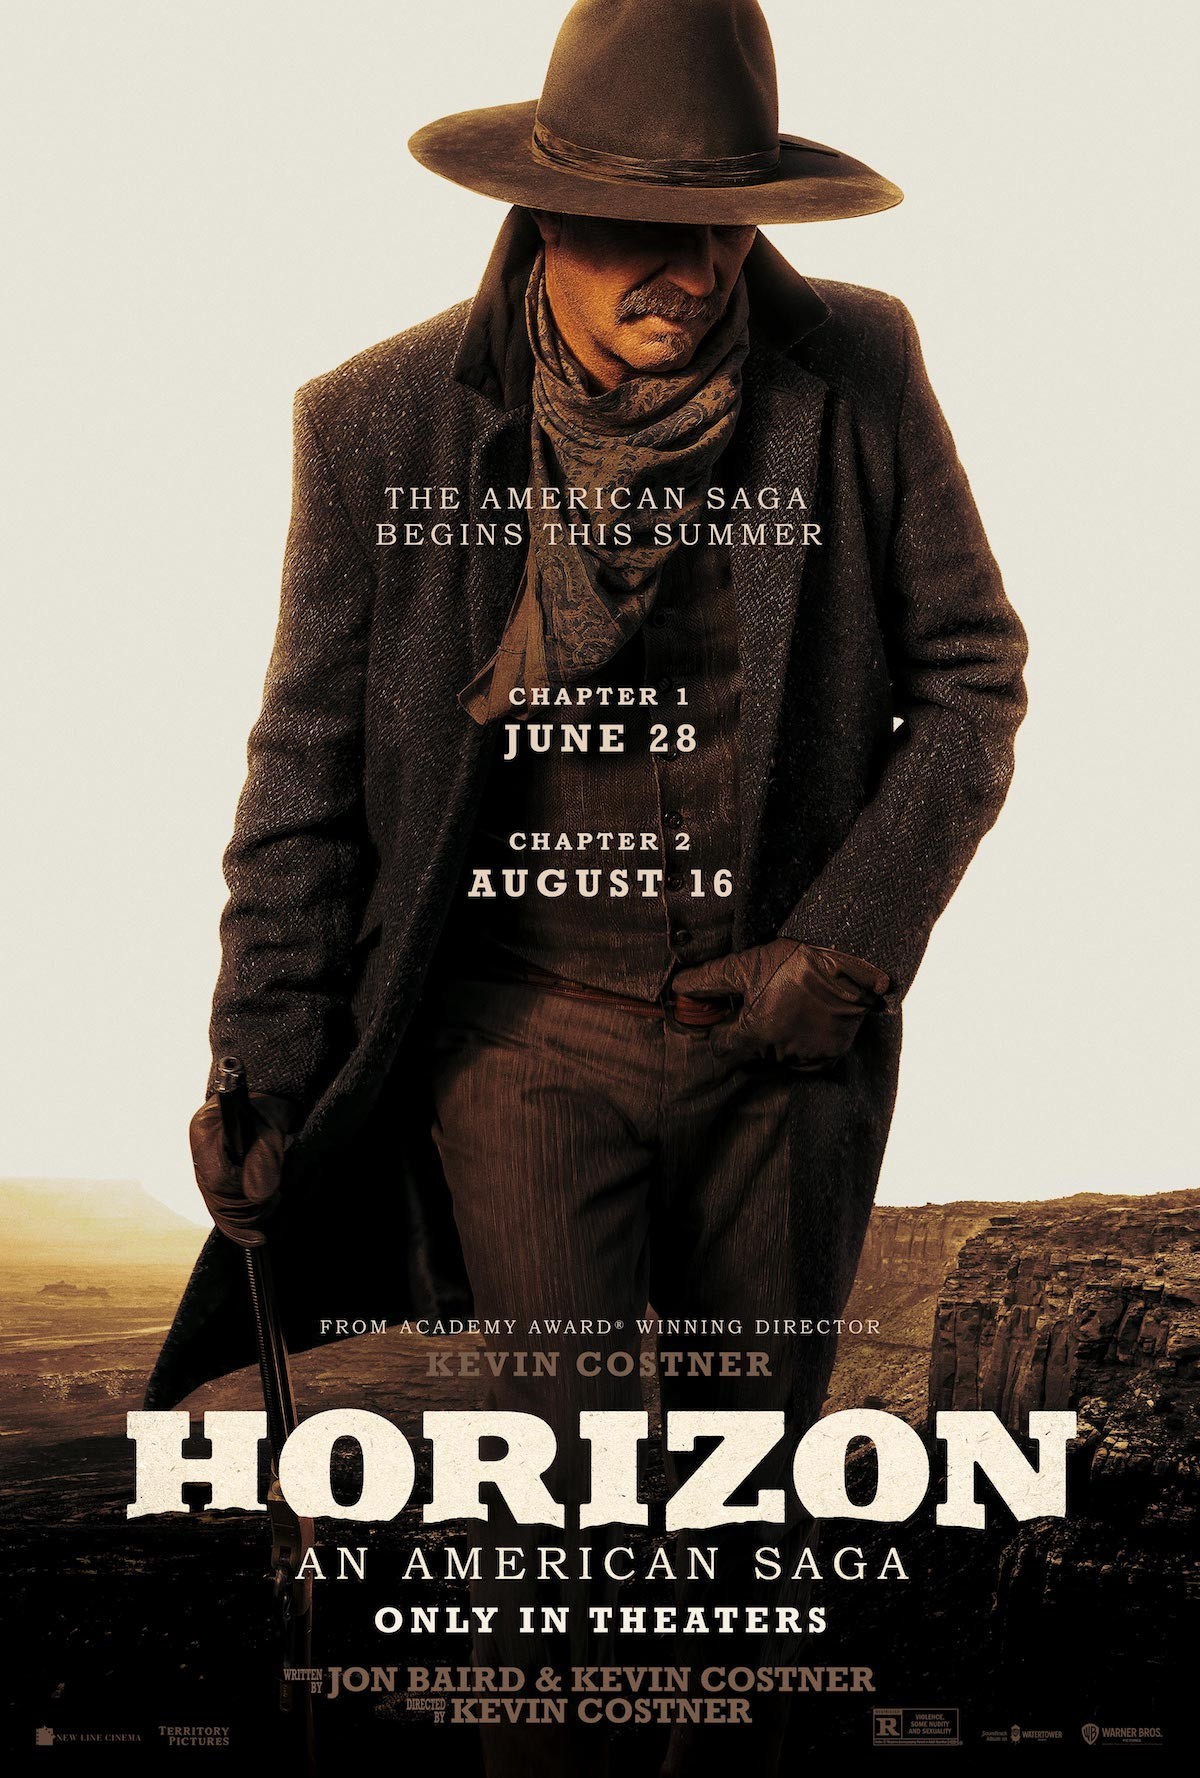 <p>You're going to want to add this summer movie to your list of favorite Westerns. The film covers 1861 to 1865 during the Civil War, and explores themes of family, identity, and good and evil as the United States goes to war. Chapter 2 will premiere August 16.</p><p><em>Horizon: An American Saga: Chapter 1 hits theaters June 28. The movie stars Kevin Costner, Sienna Miller, Sam Worthington, Jena Malone, Owen Crow Shoe, Tatanka Means, Ella Hunt, Isabelle Fuhrman, and Jamie Campbell Bower.</em></p>